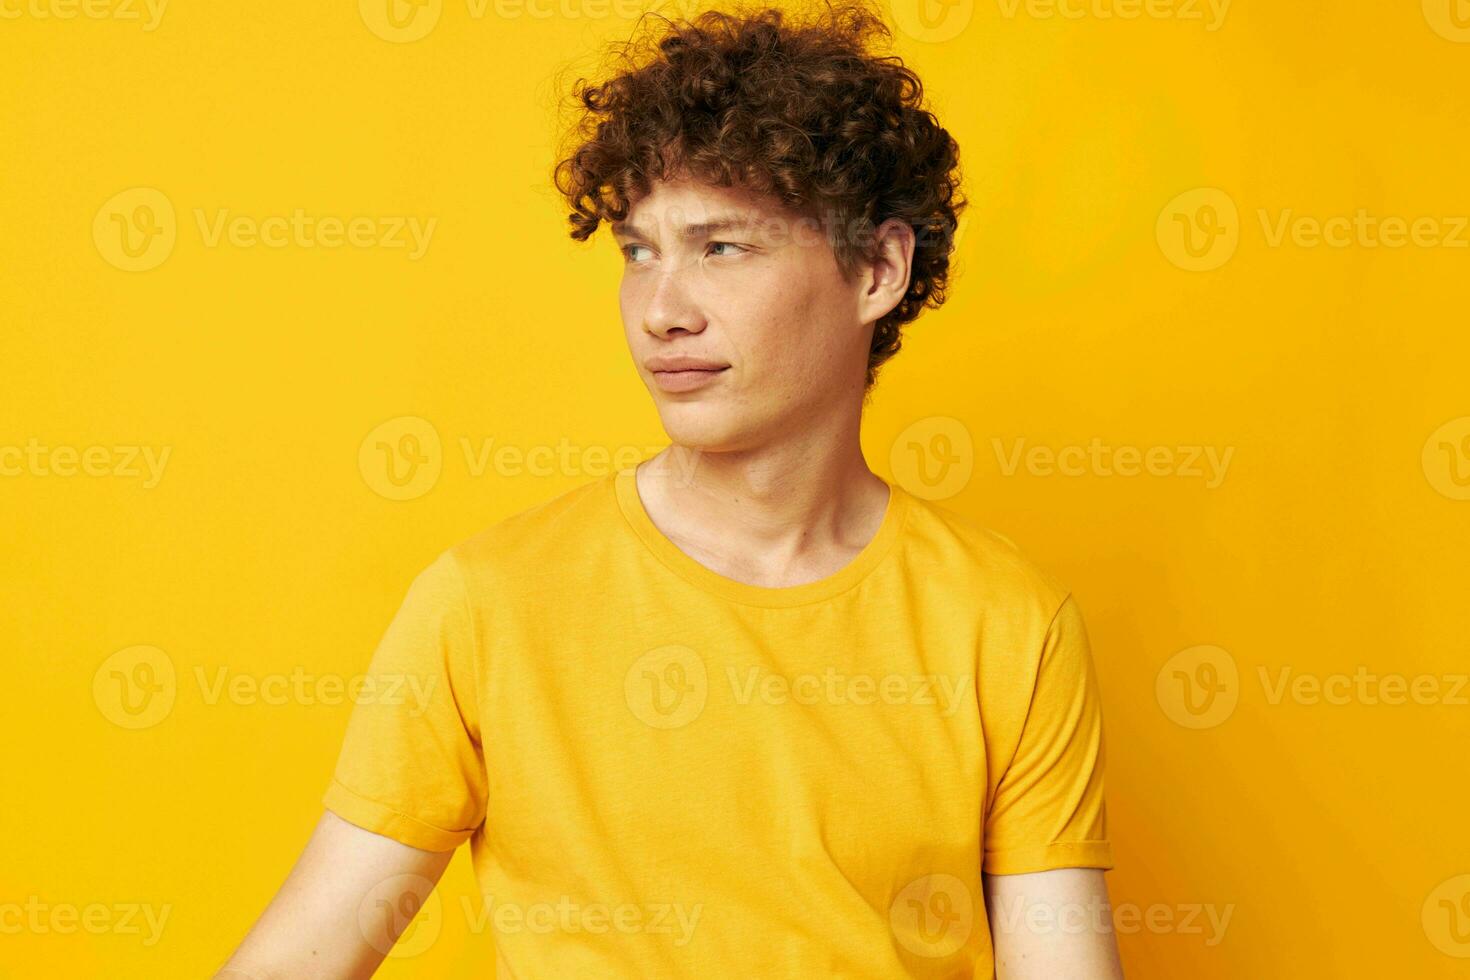 guy with red curly hair yellow t-shirt fashion hand gestures isolated background unaltered photo